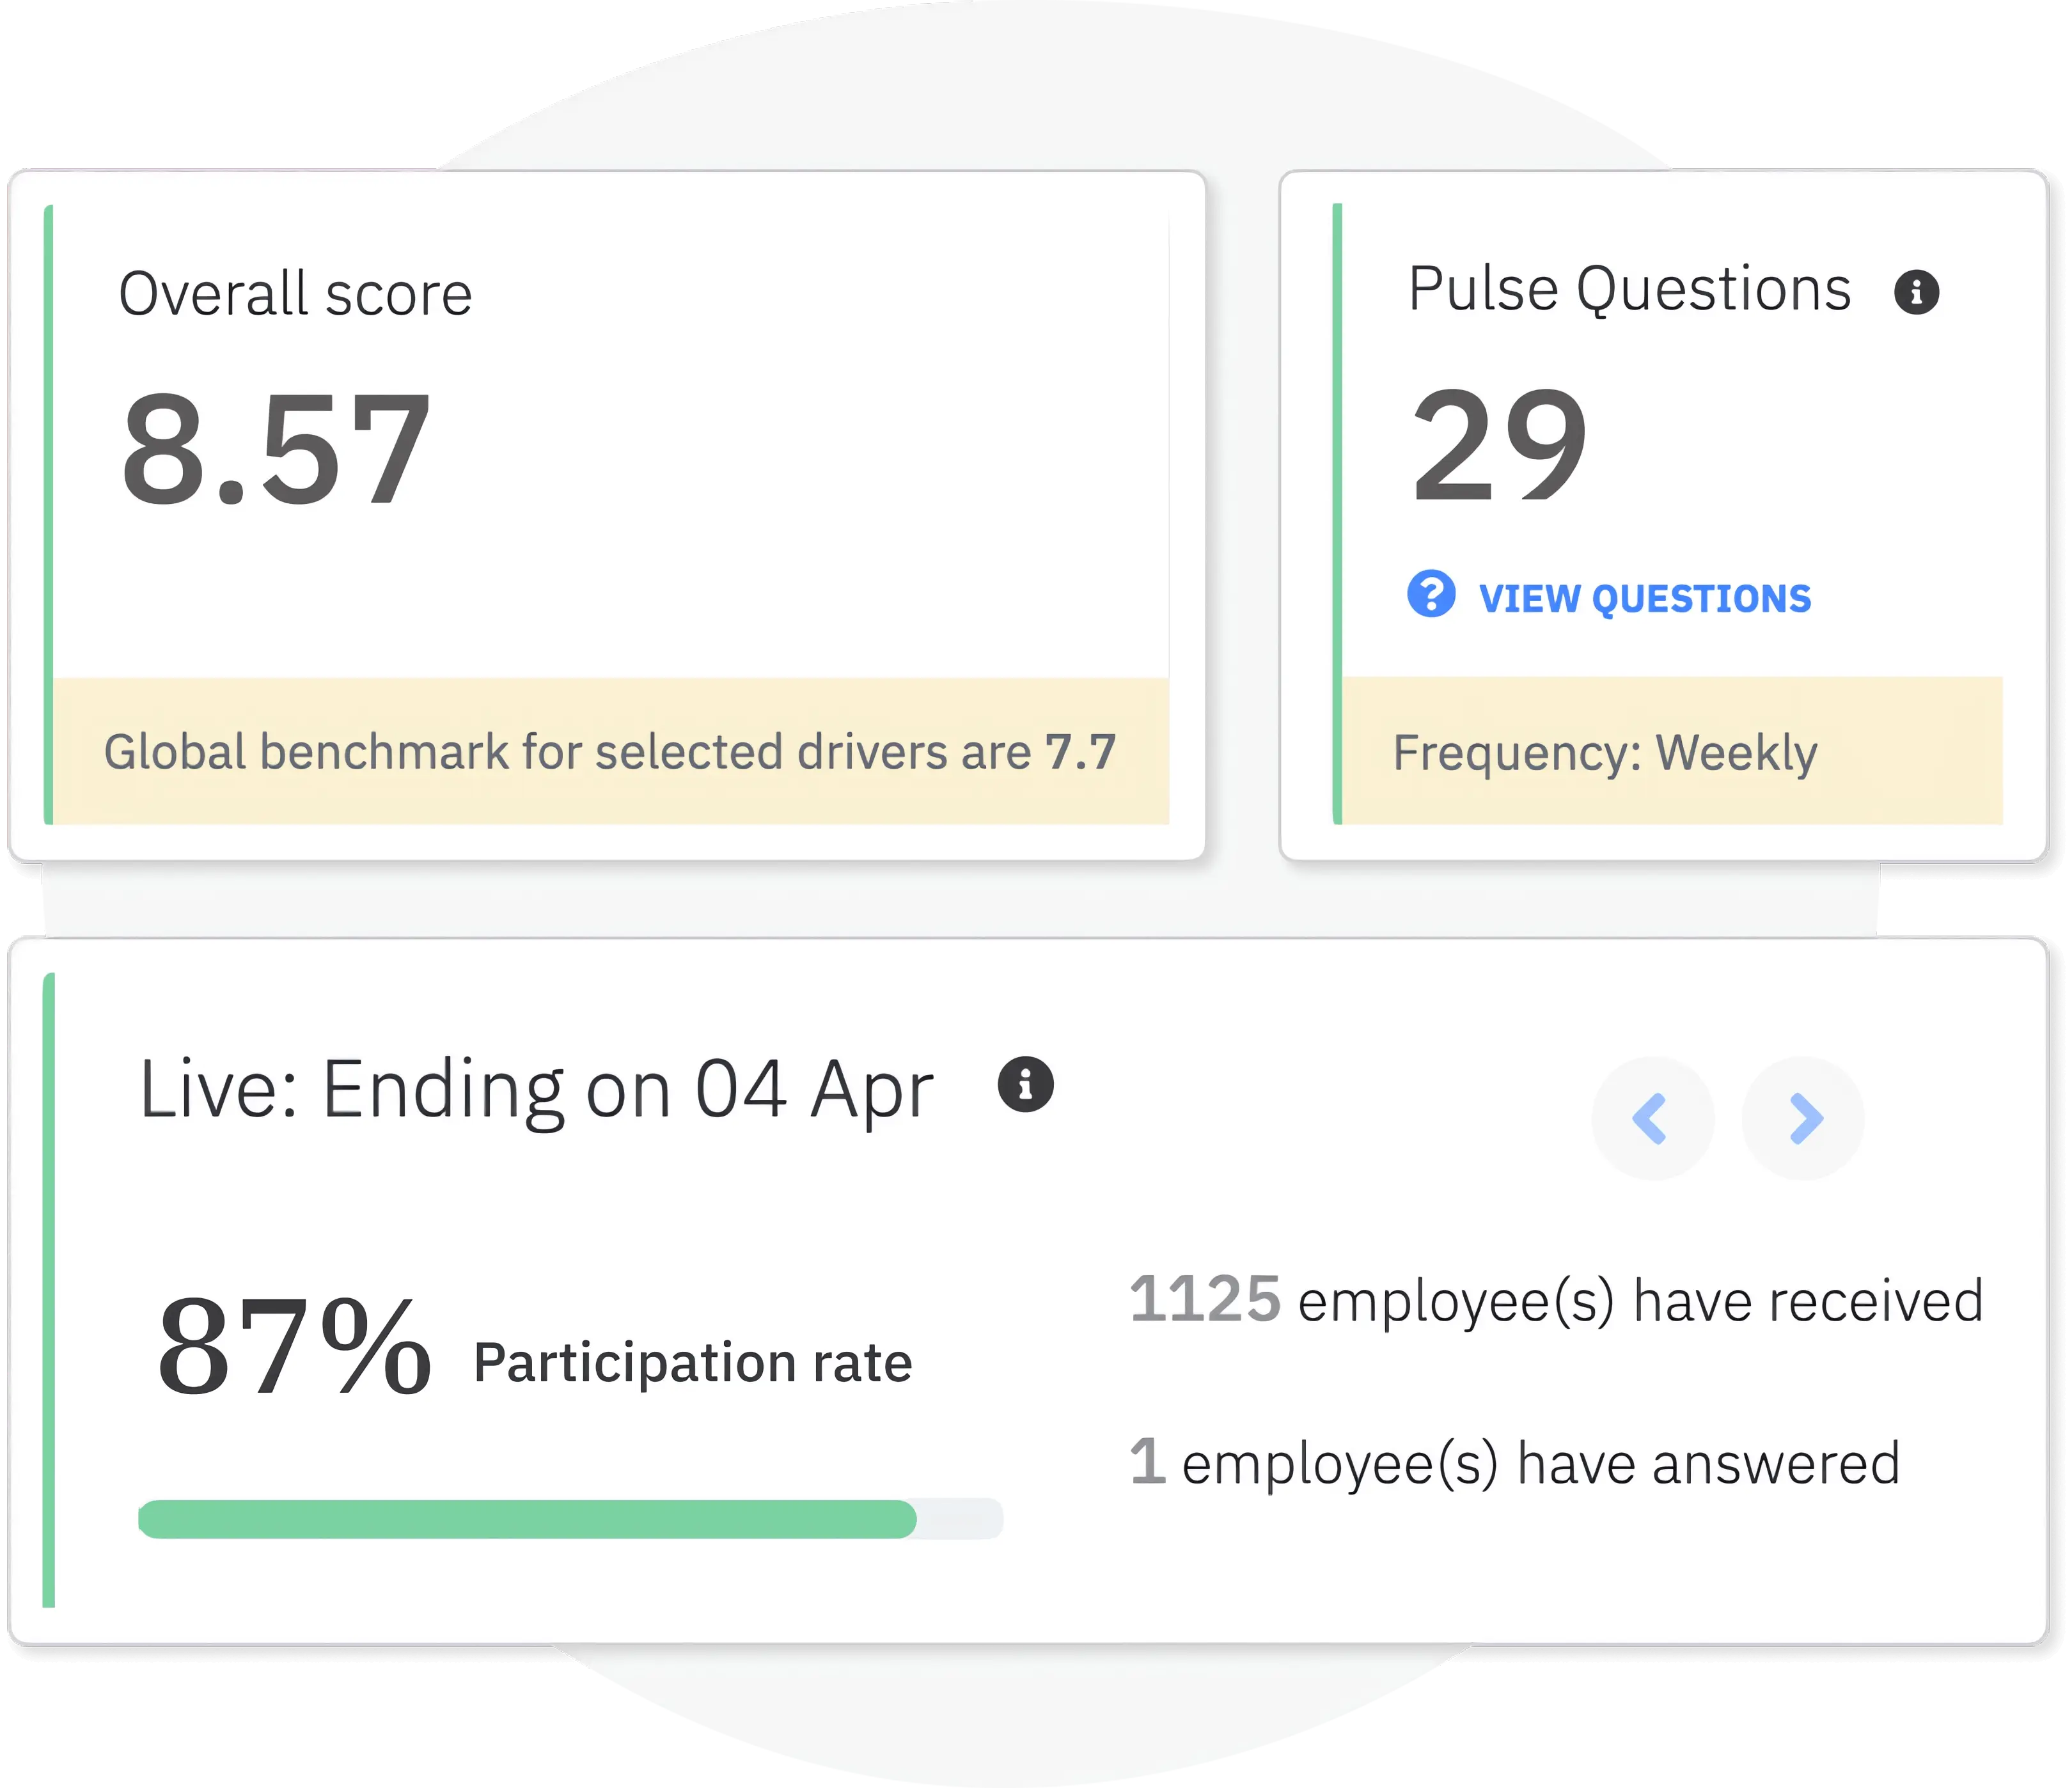 All pulse survey metrics at one place to analyze and take quick actions